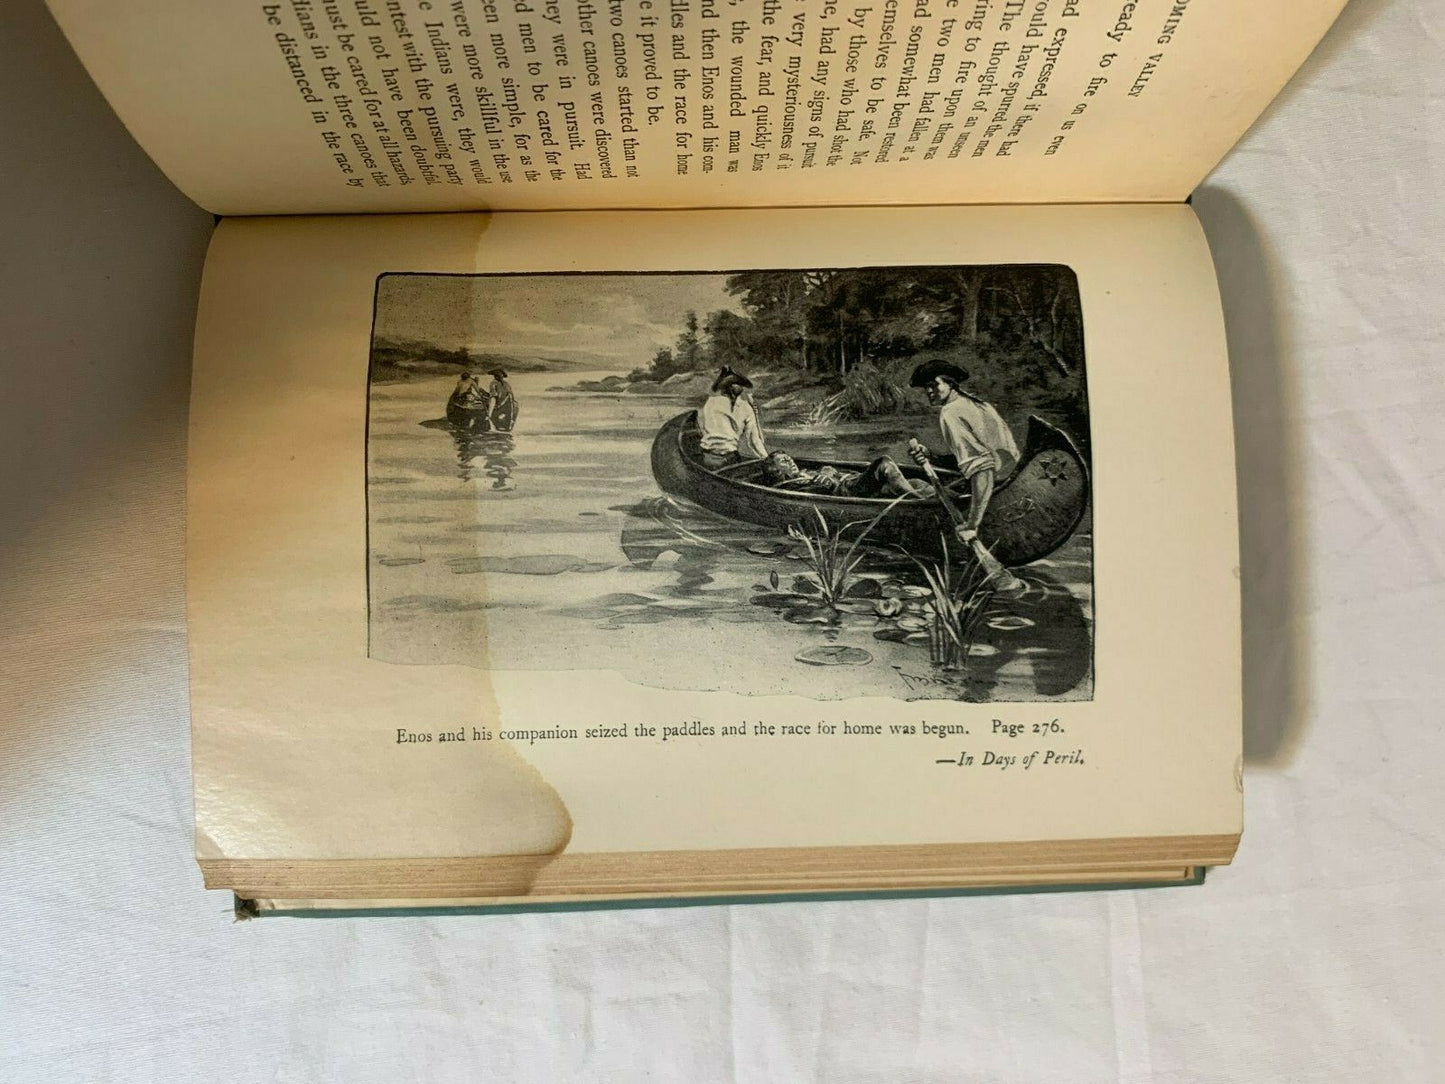 In Days of Peril: A Boy's Story of the Massacre, Everett T. Tomlinson, 1901 (C1)